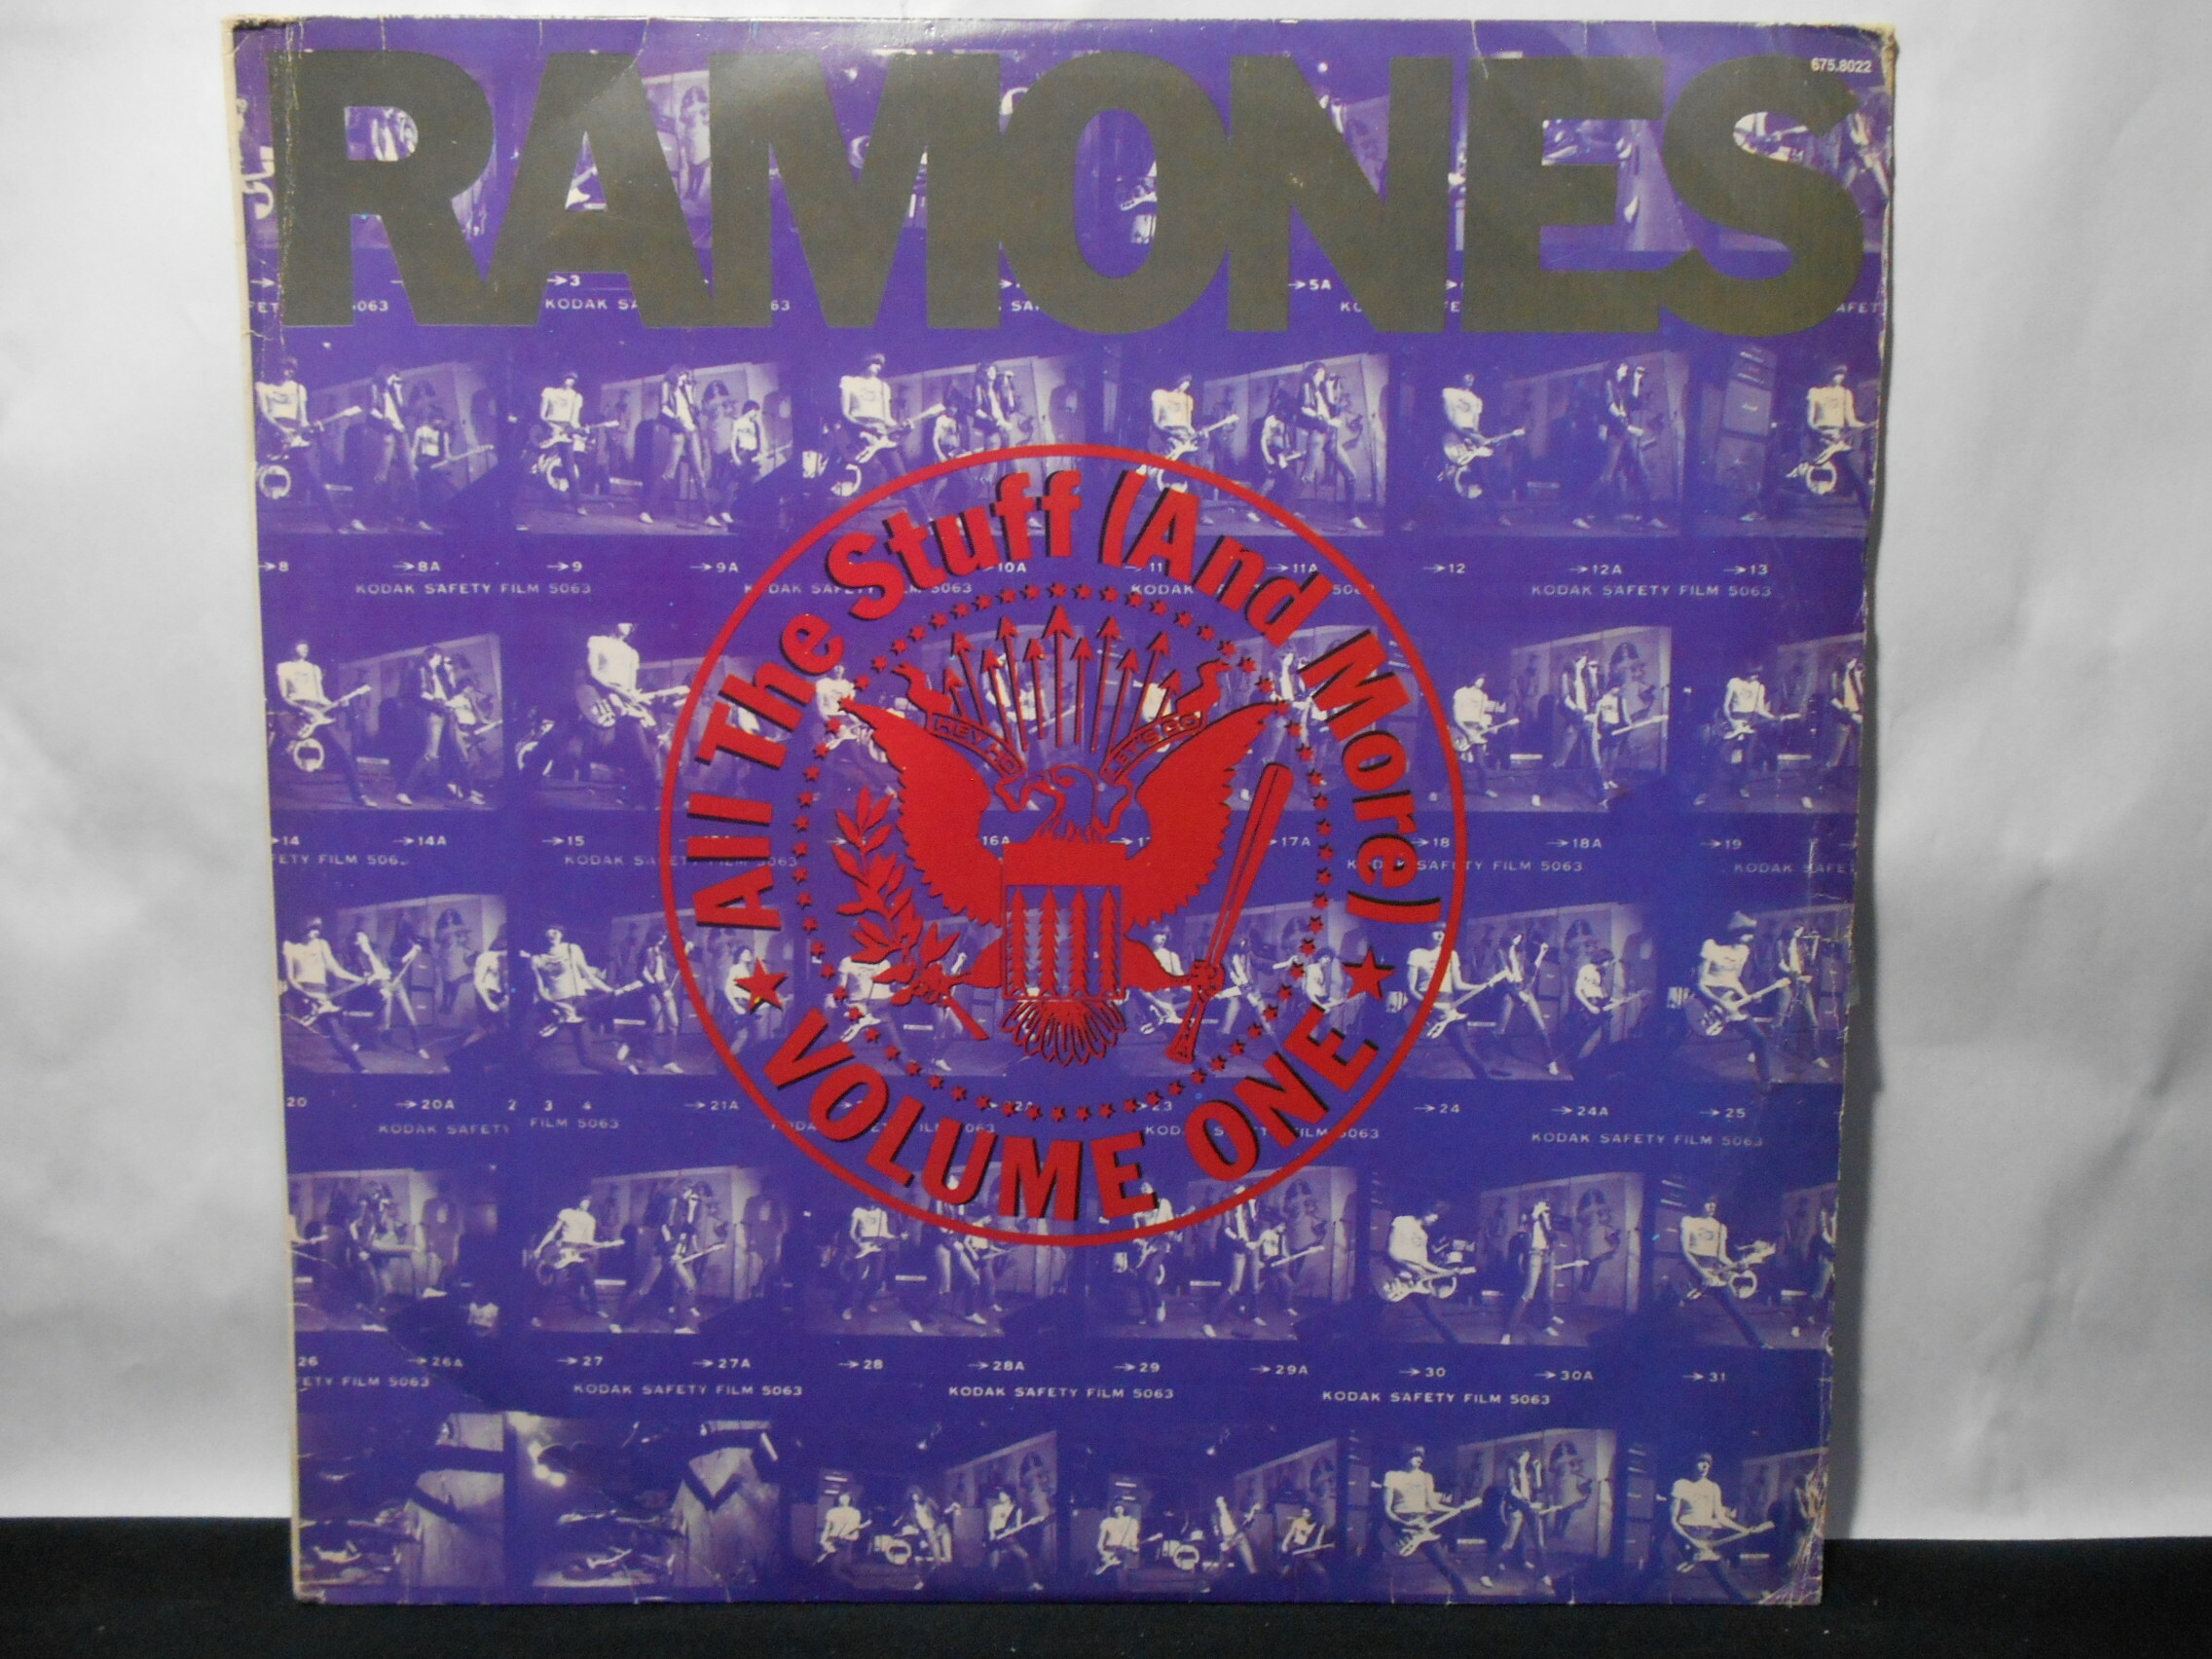 Vinil - Ramones - All The Stuff (And More) Volume One (Duplo)